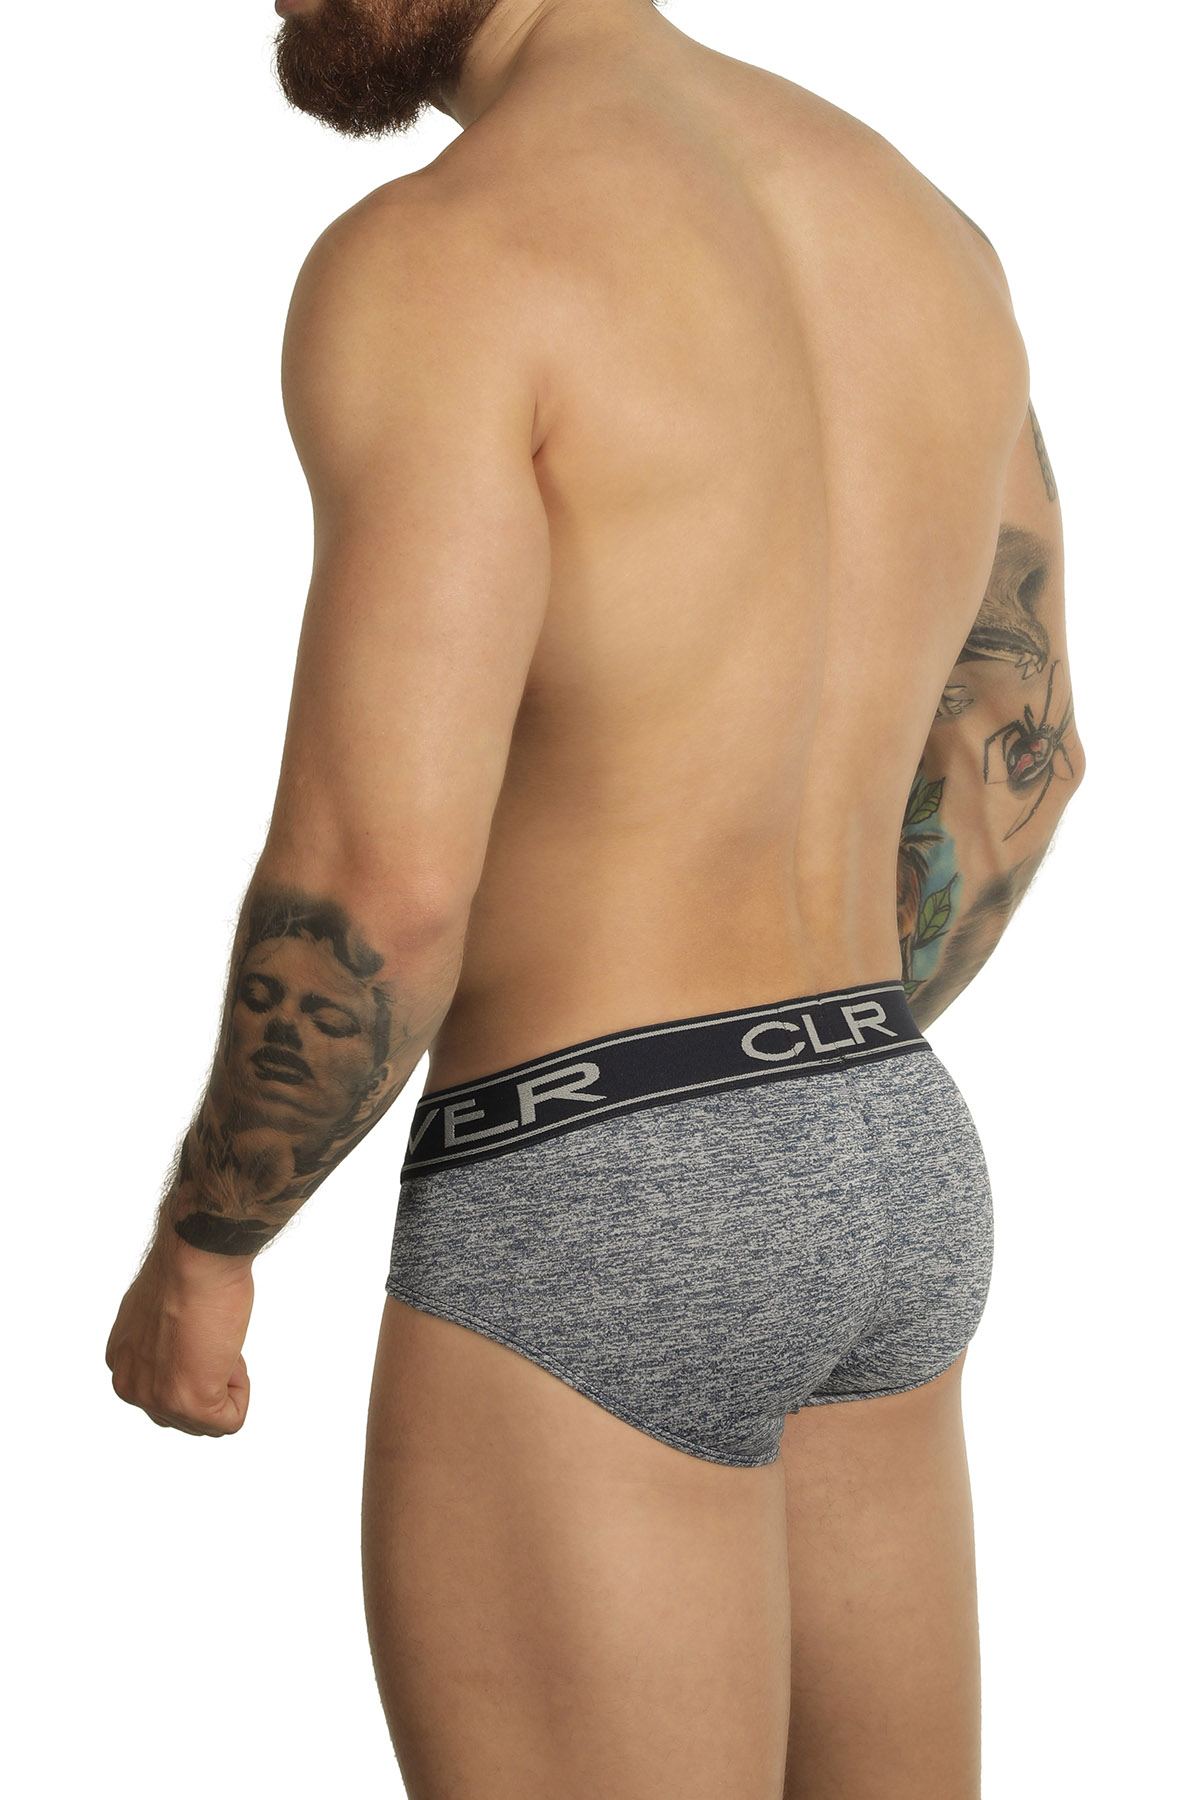 Clever Limited Edition Blue Latin Brief 519916